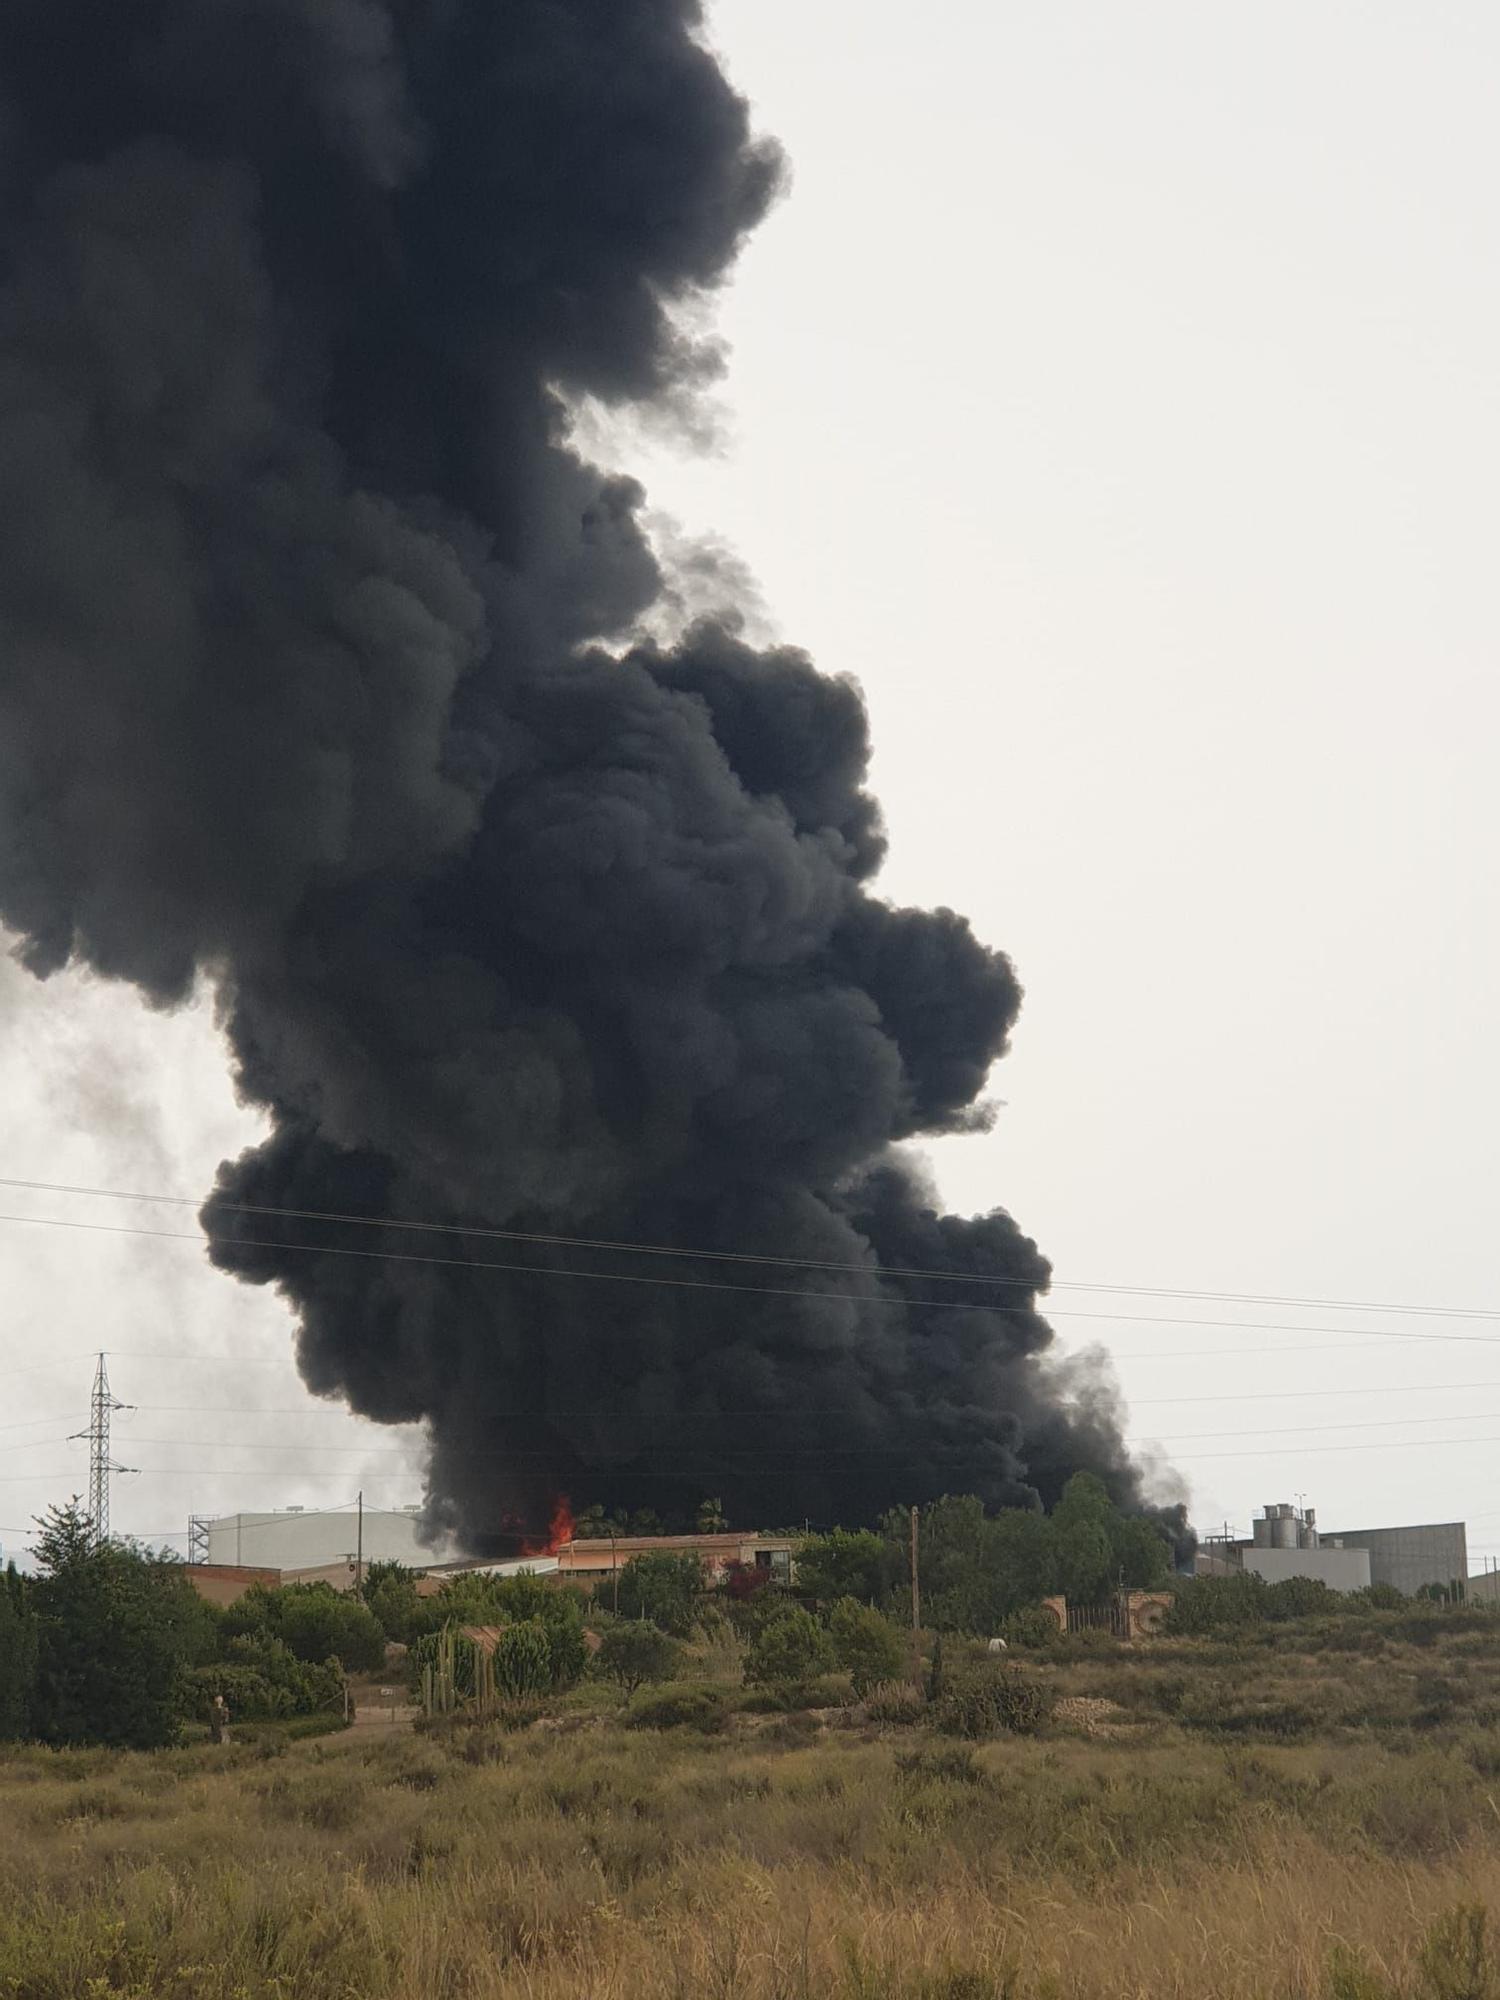 Shocking images of the San Vicente del Raspeig factory fire